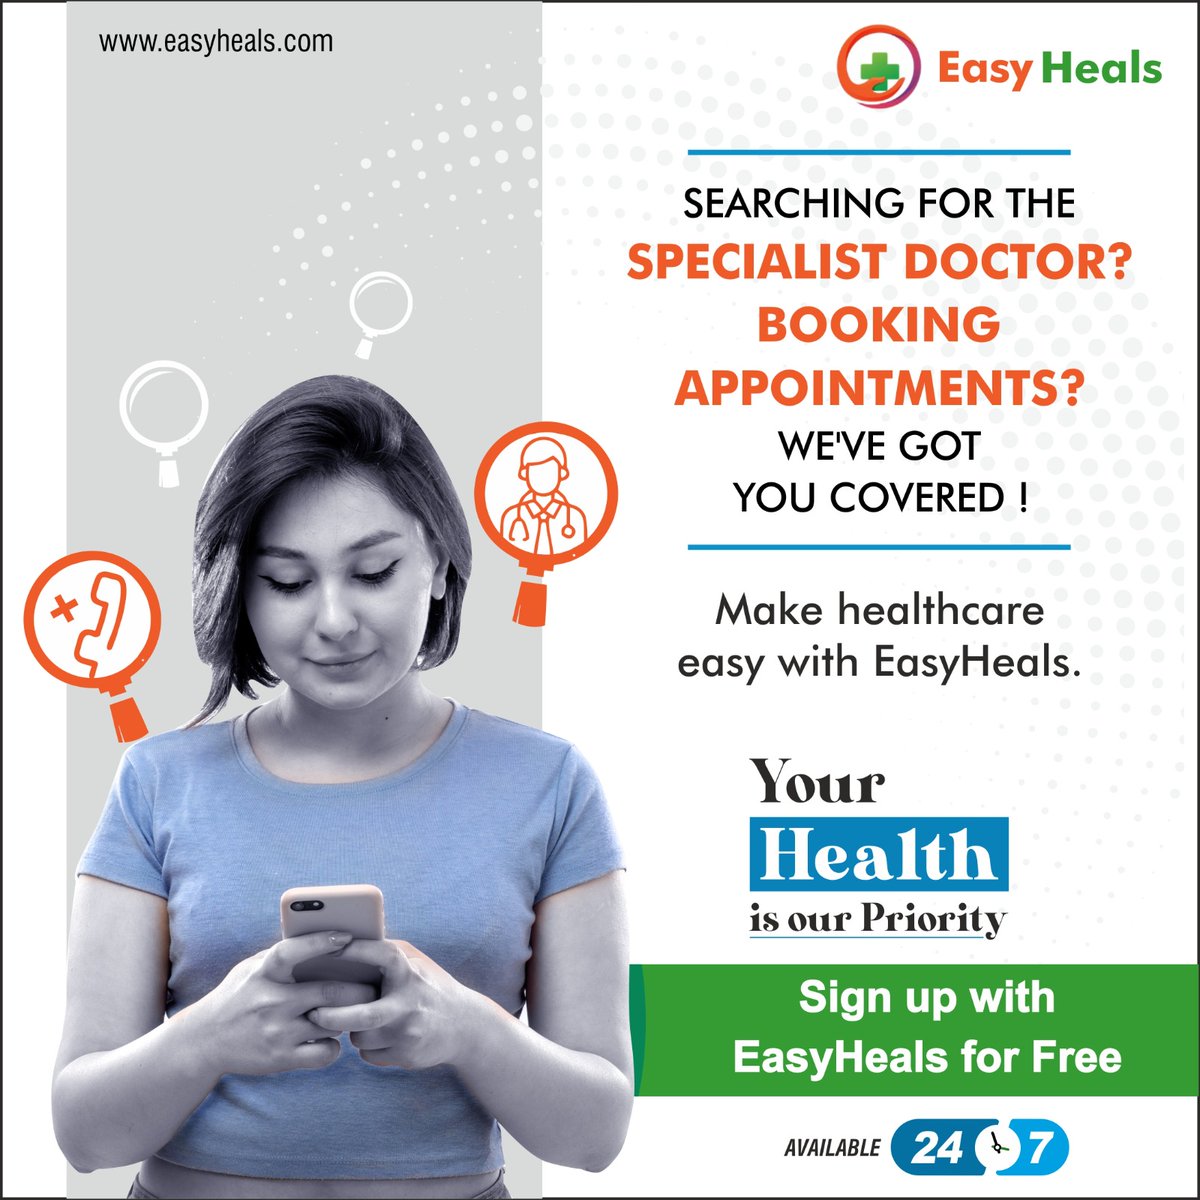 With Easy Heals, your healthcare journey is a breeze!
Discover the features that make healthcare easy and convenient!

Download our app now
play.google.com/store/apps/det… 

#EasyHeals #EasyHealsApp #HealthcareMadeEasy #DoctorSearch #AppointmentBooking #PrescriptionAccess #HealthcareApp